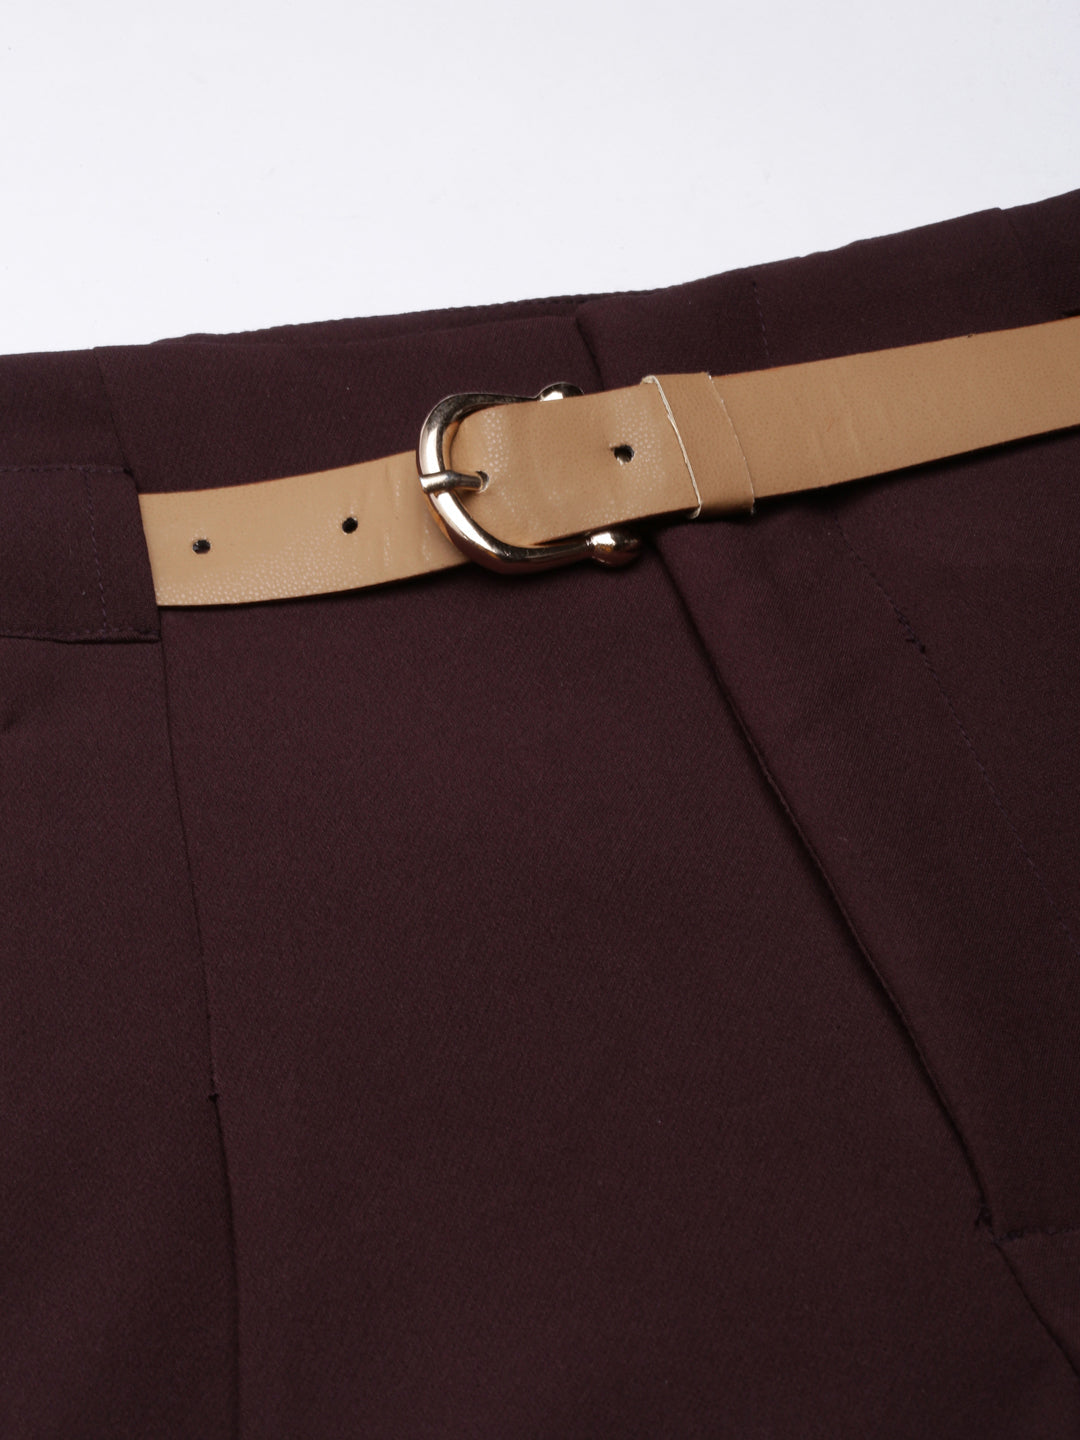 Women Solid Burgundy Parallel Trousers